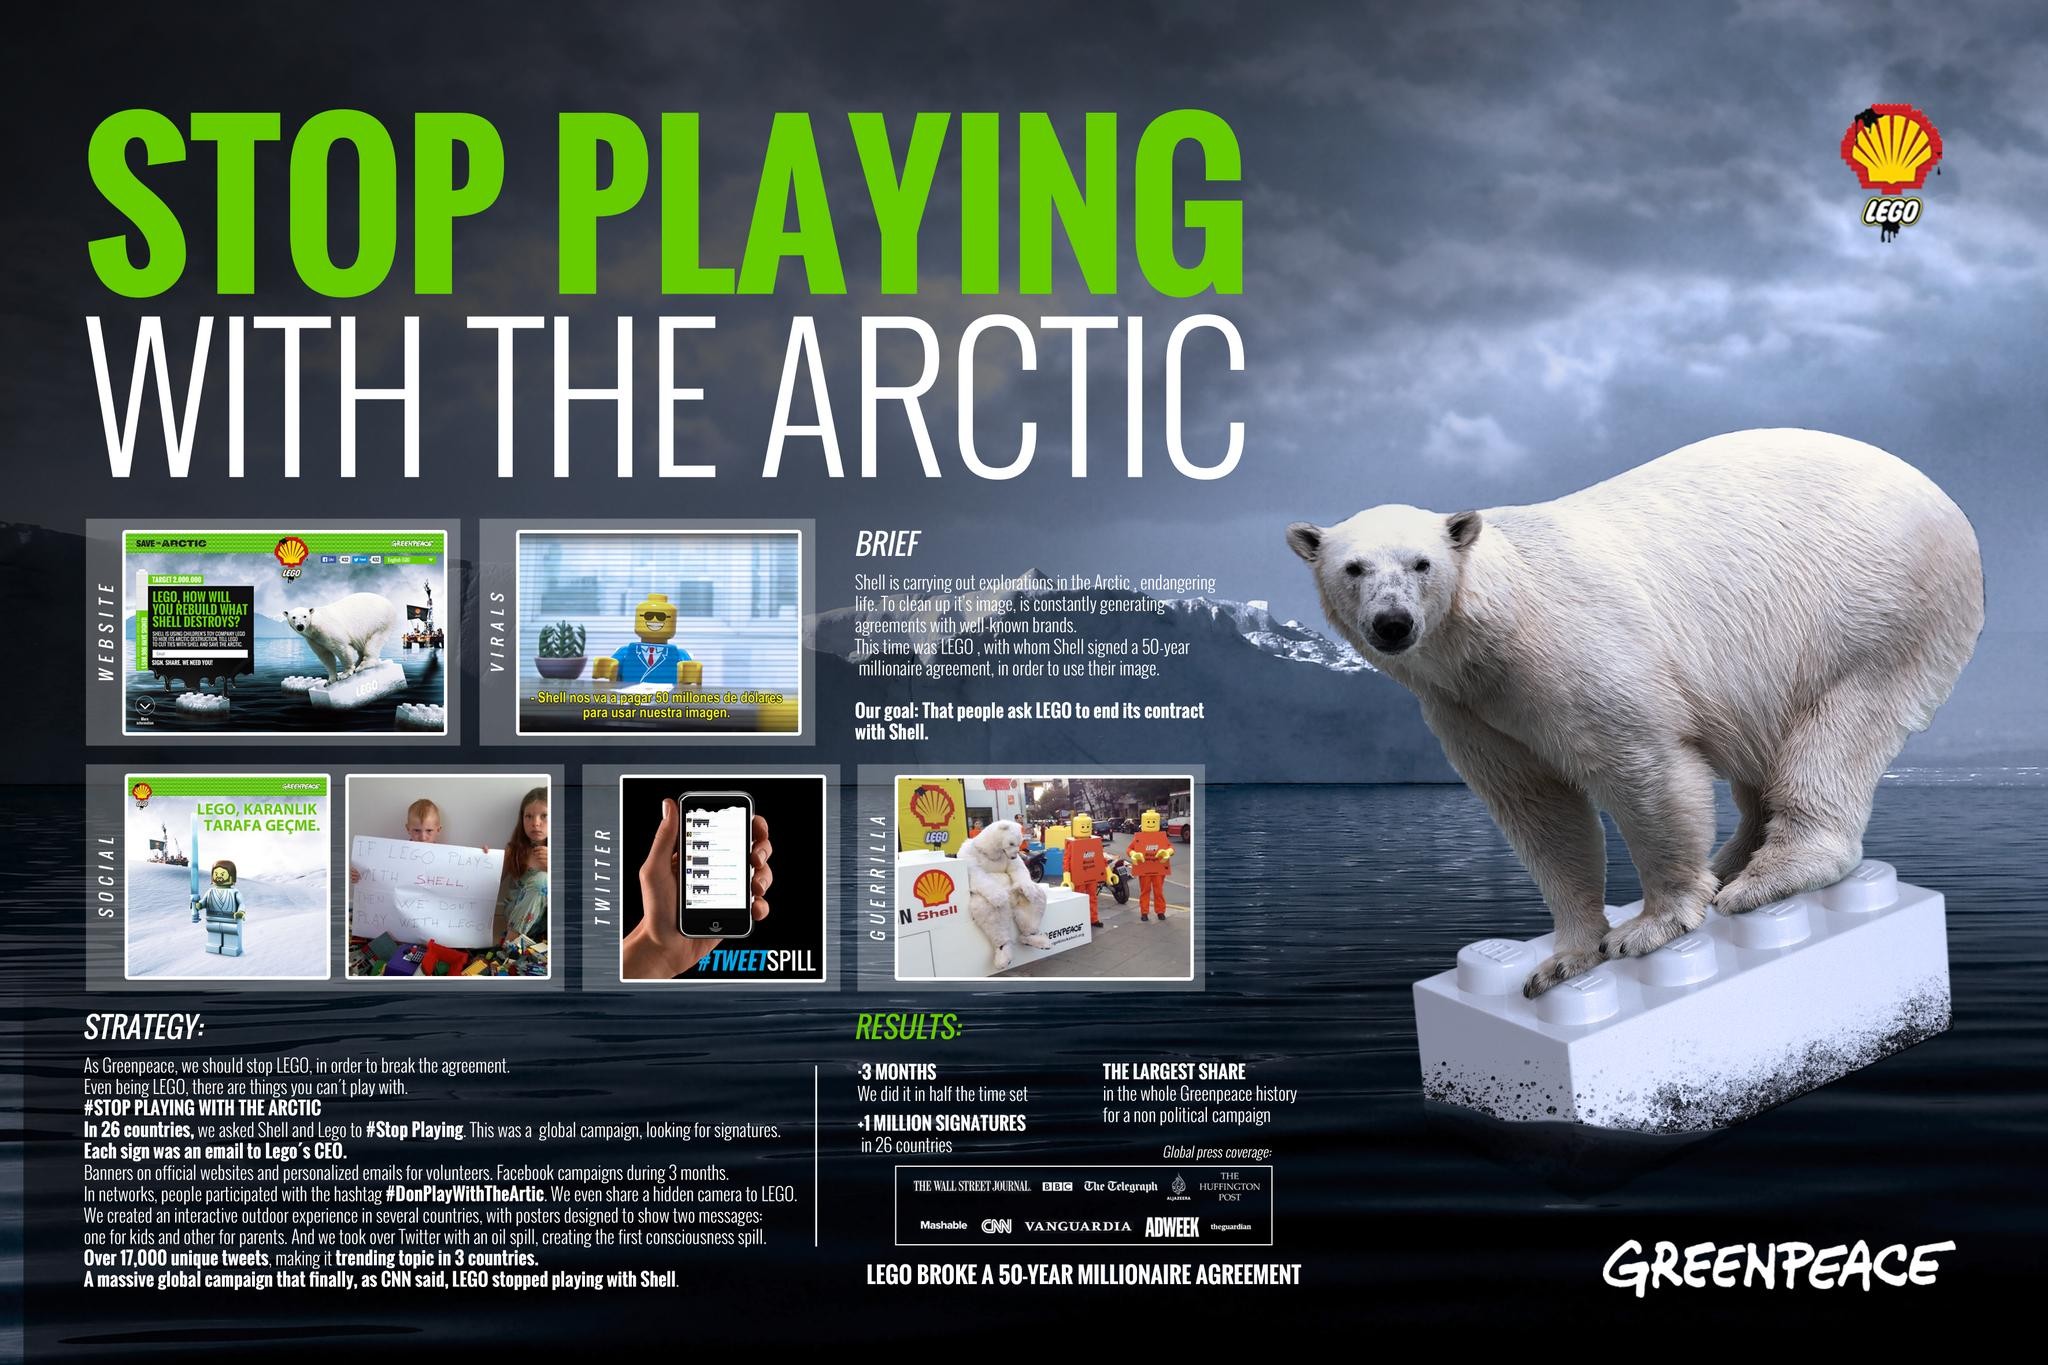 #STOPPLAYINGWITHTHEARCTIC